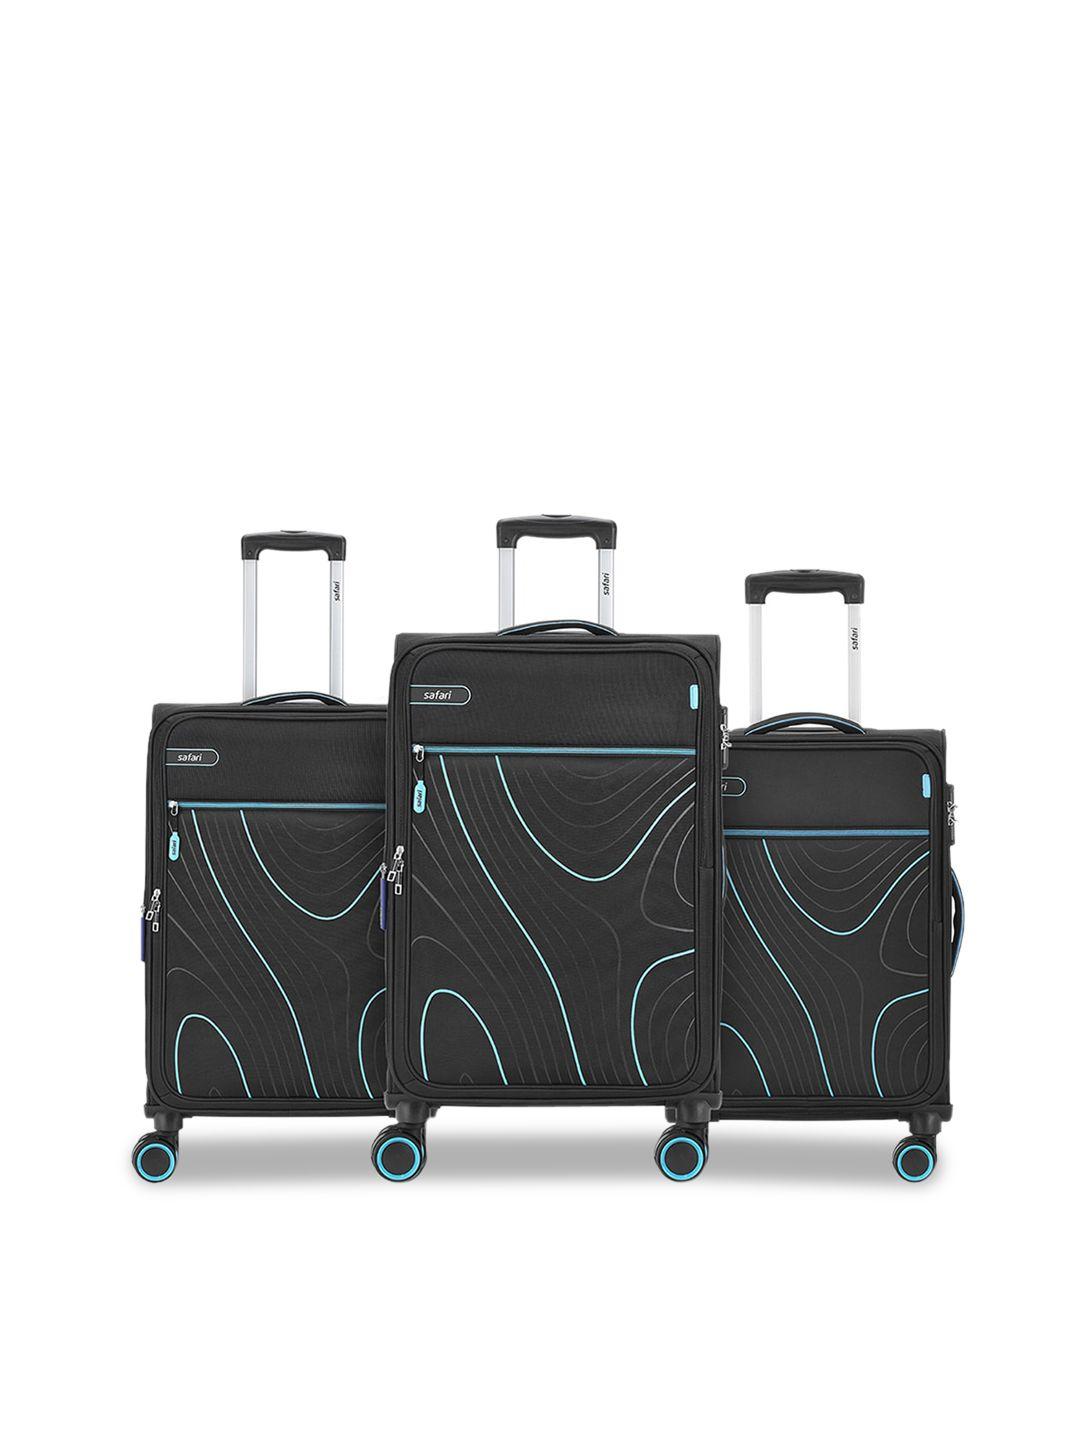 safari set of 3 printed soft-sided expandable luggage trolley suitcases